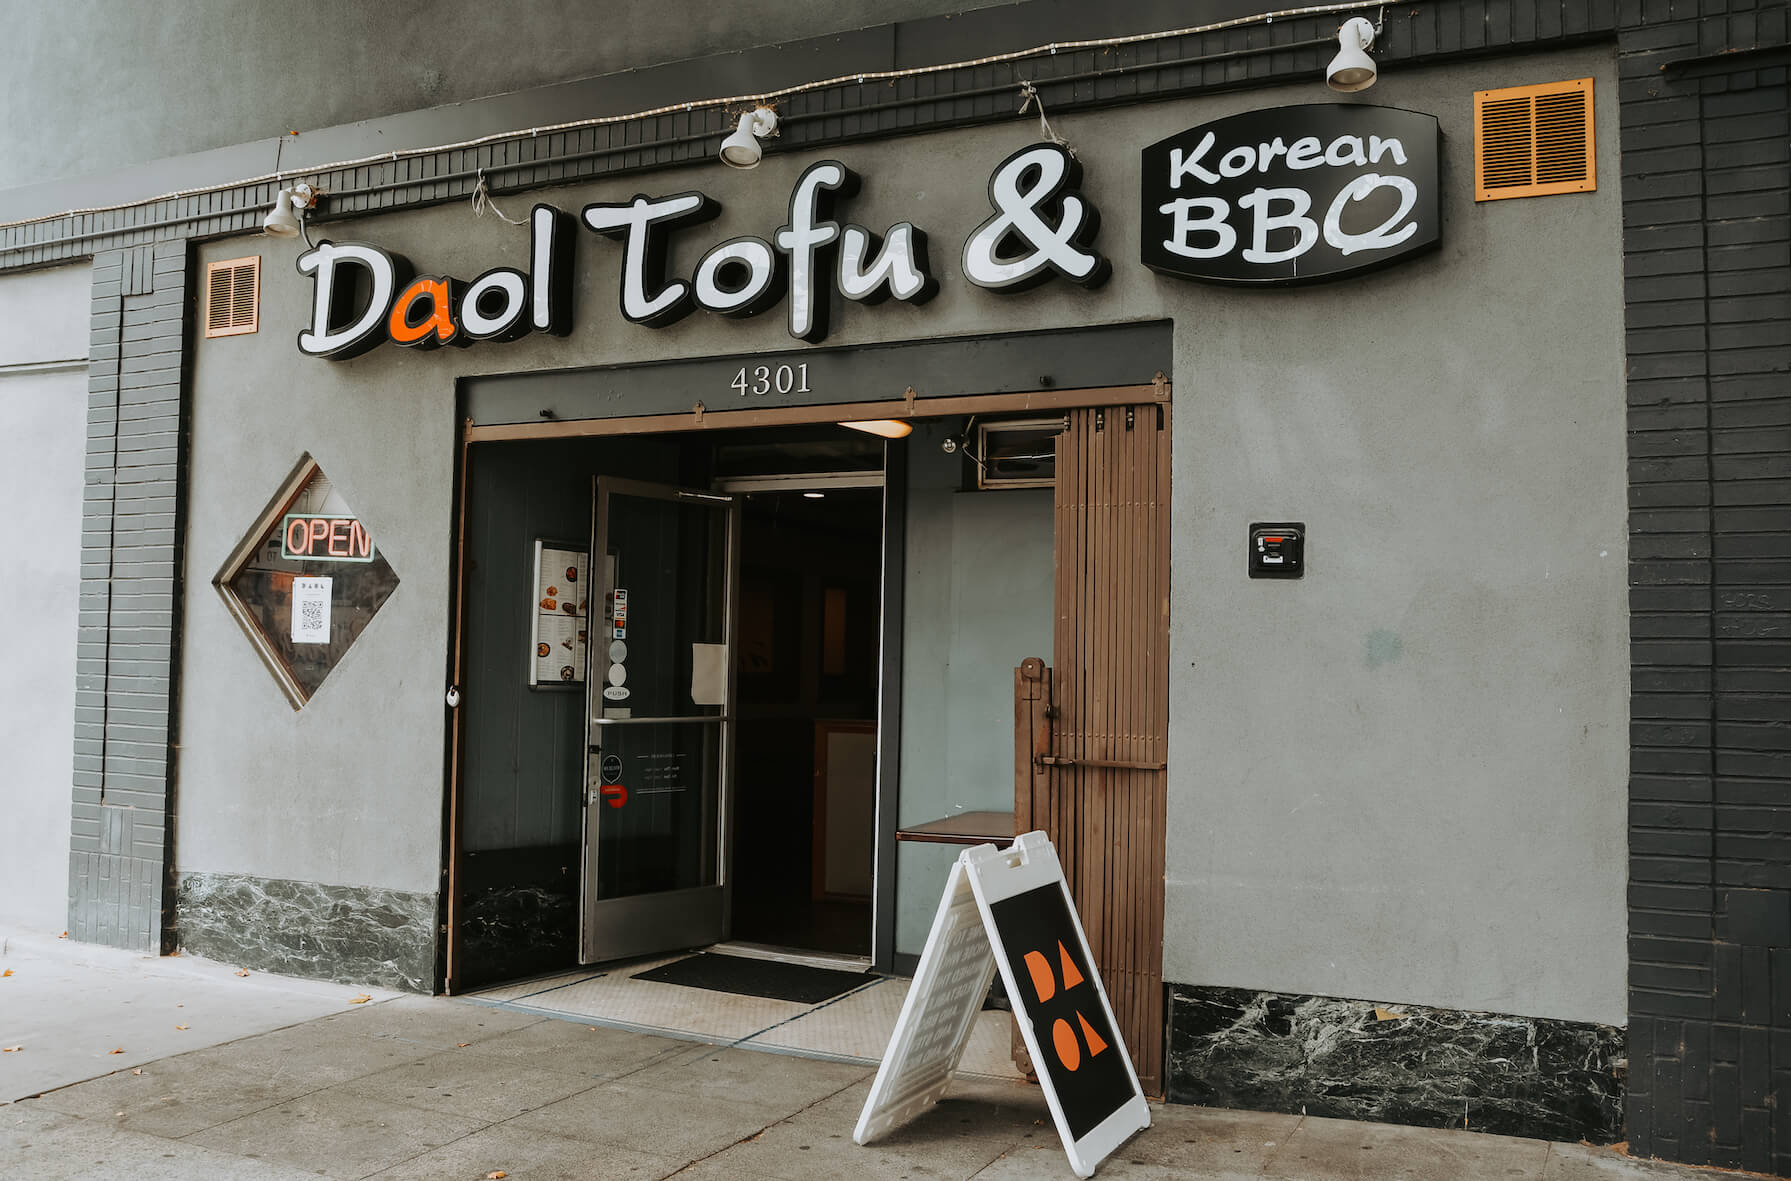 Outside view of Daol Tofu & Korean BBQ in Oakland, CA. August 2021